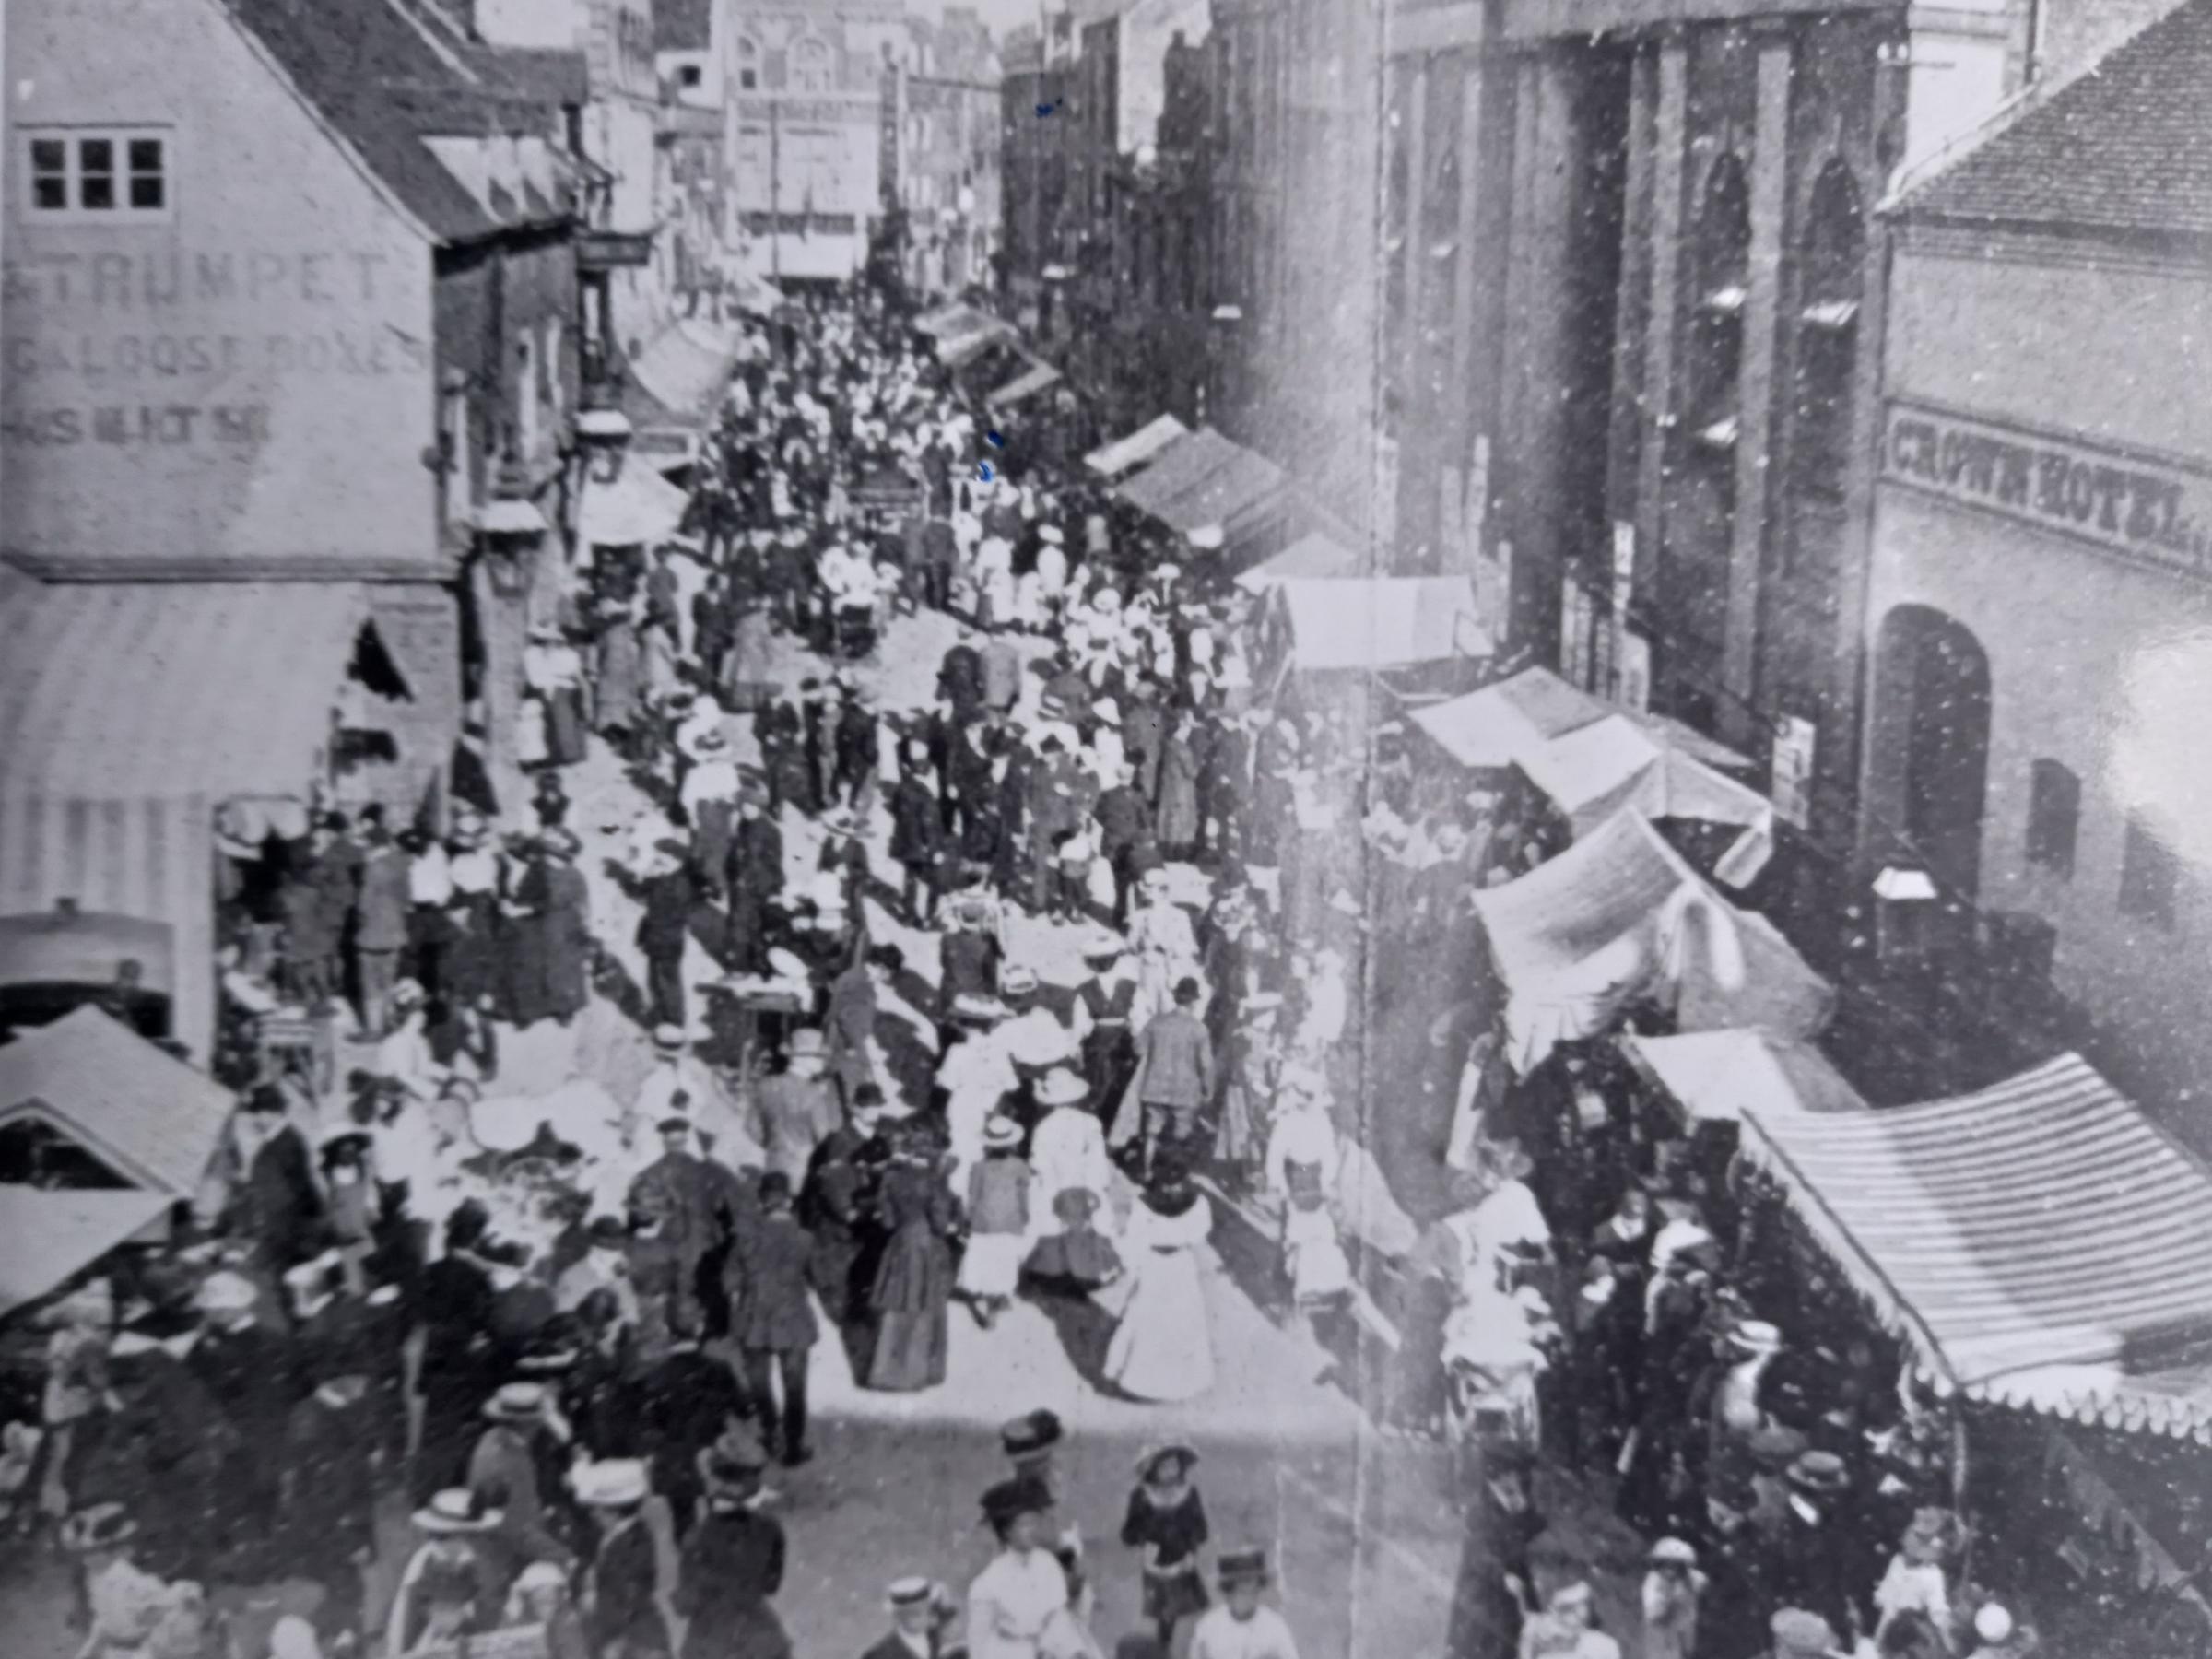 A Berrow’s Journal photo from September 1909 showing a packed Angel Street for the fair. The view is looking towards The Foregate with the Horn and Trumpet pub on the left